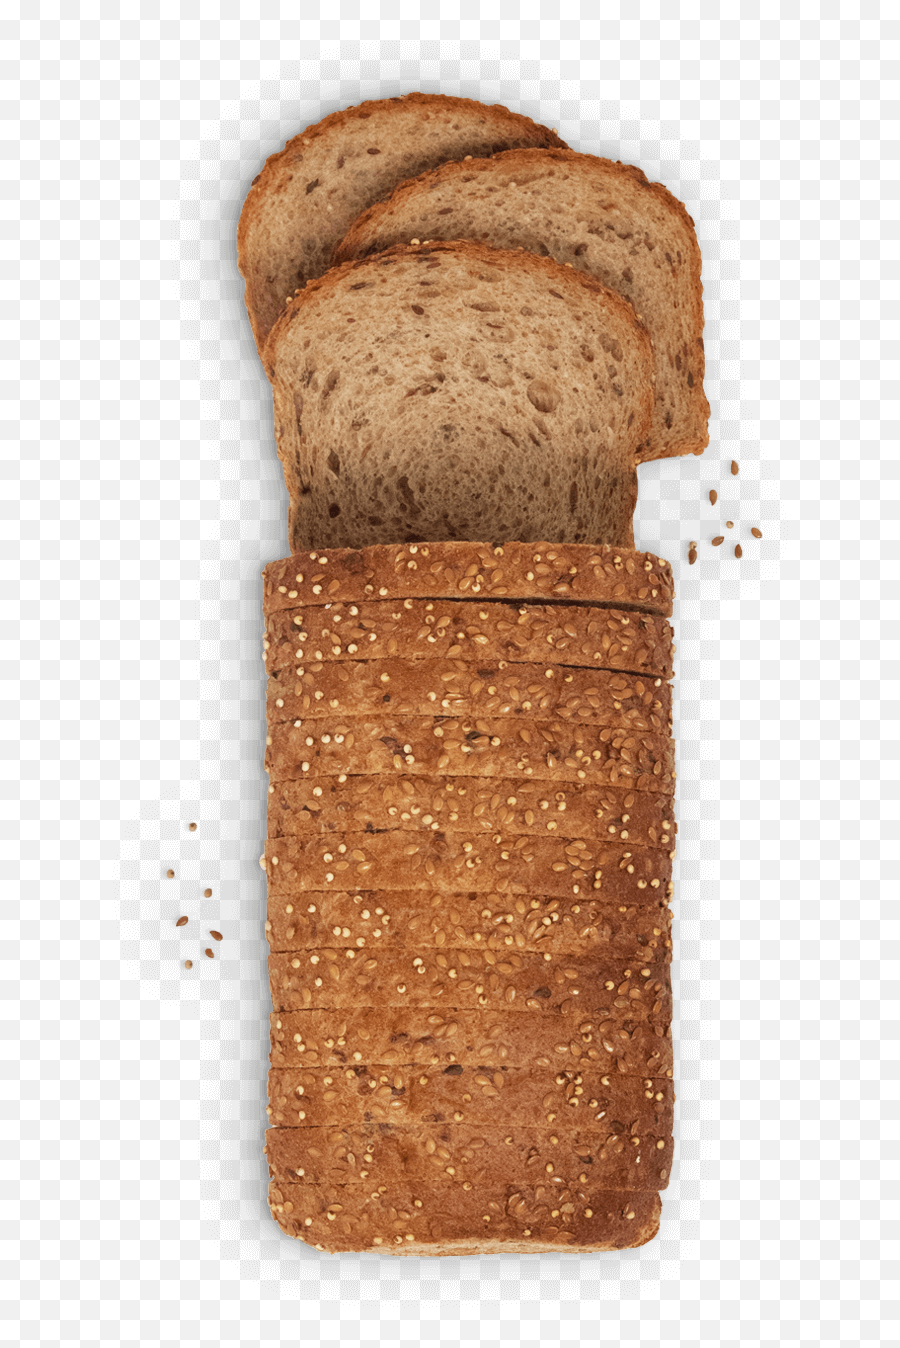 Download Grains Png Image With No - Whole Wheat Bread,Grains Png